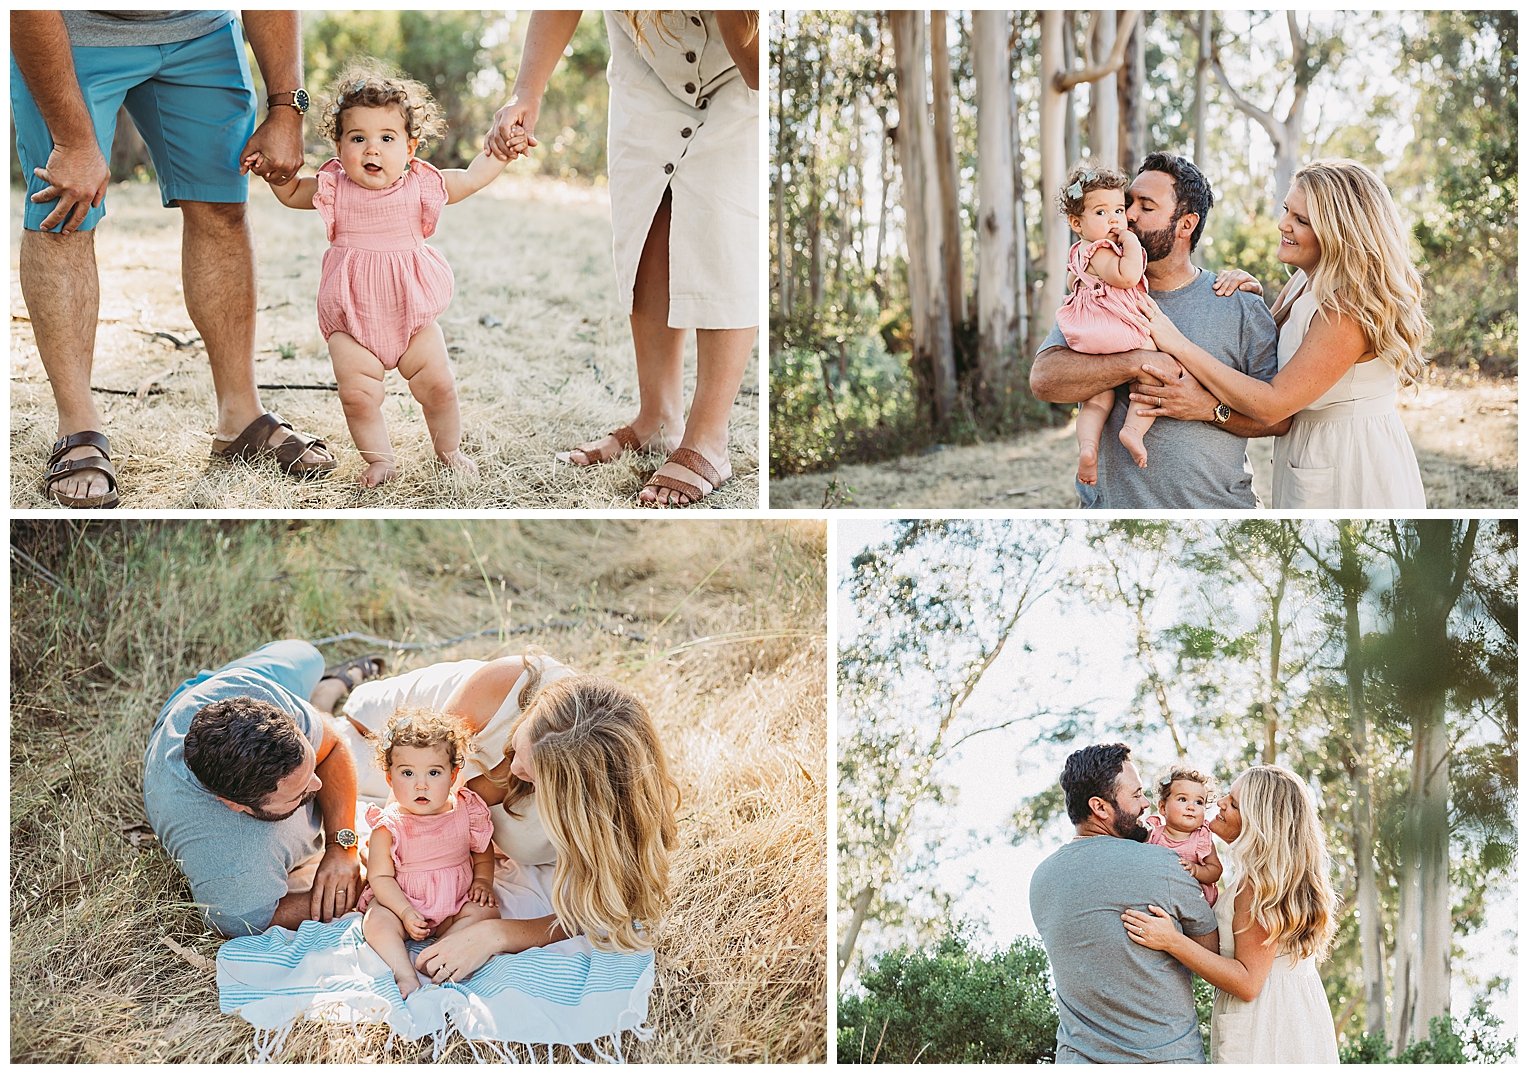 Family Session in the Eucalyptus Groves at Sorich Park.